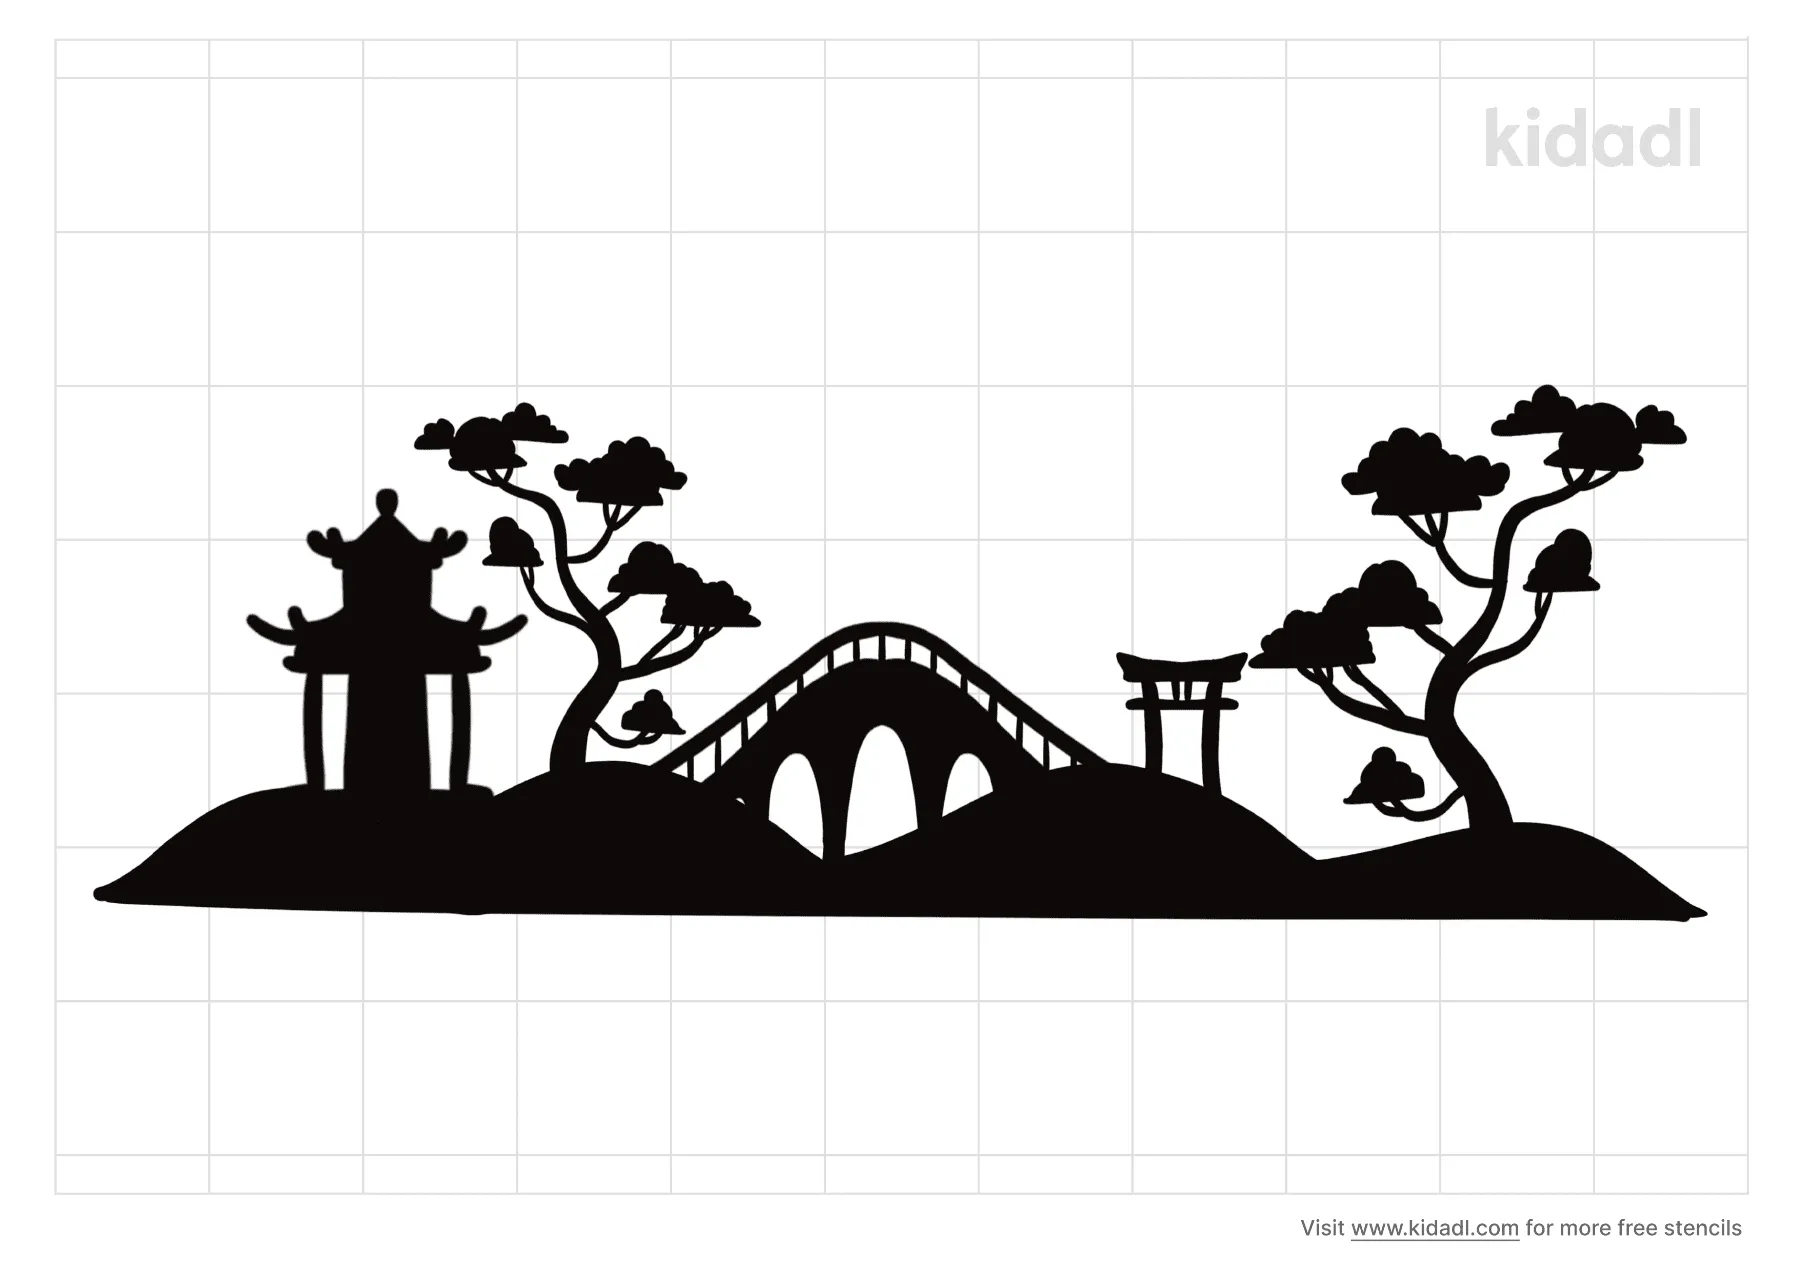 Chinese Landscape Stencils Free Printable Nature Stencils Kidadl And Nature Stencils Free Printable Stencils Kidadl